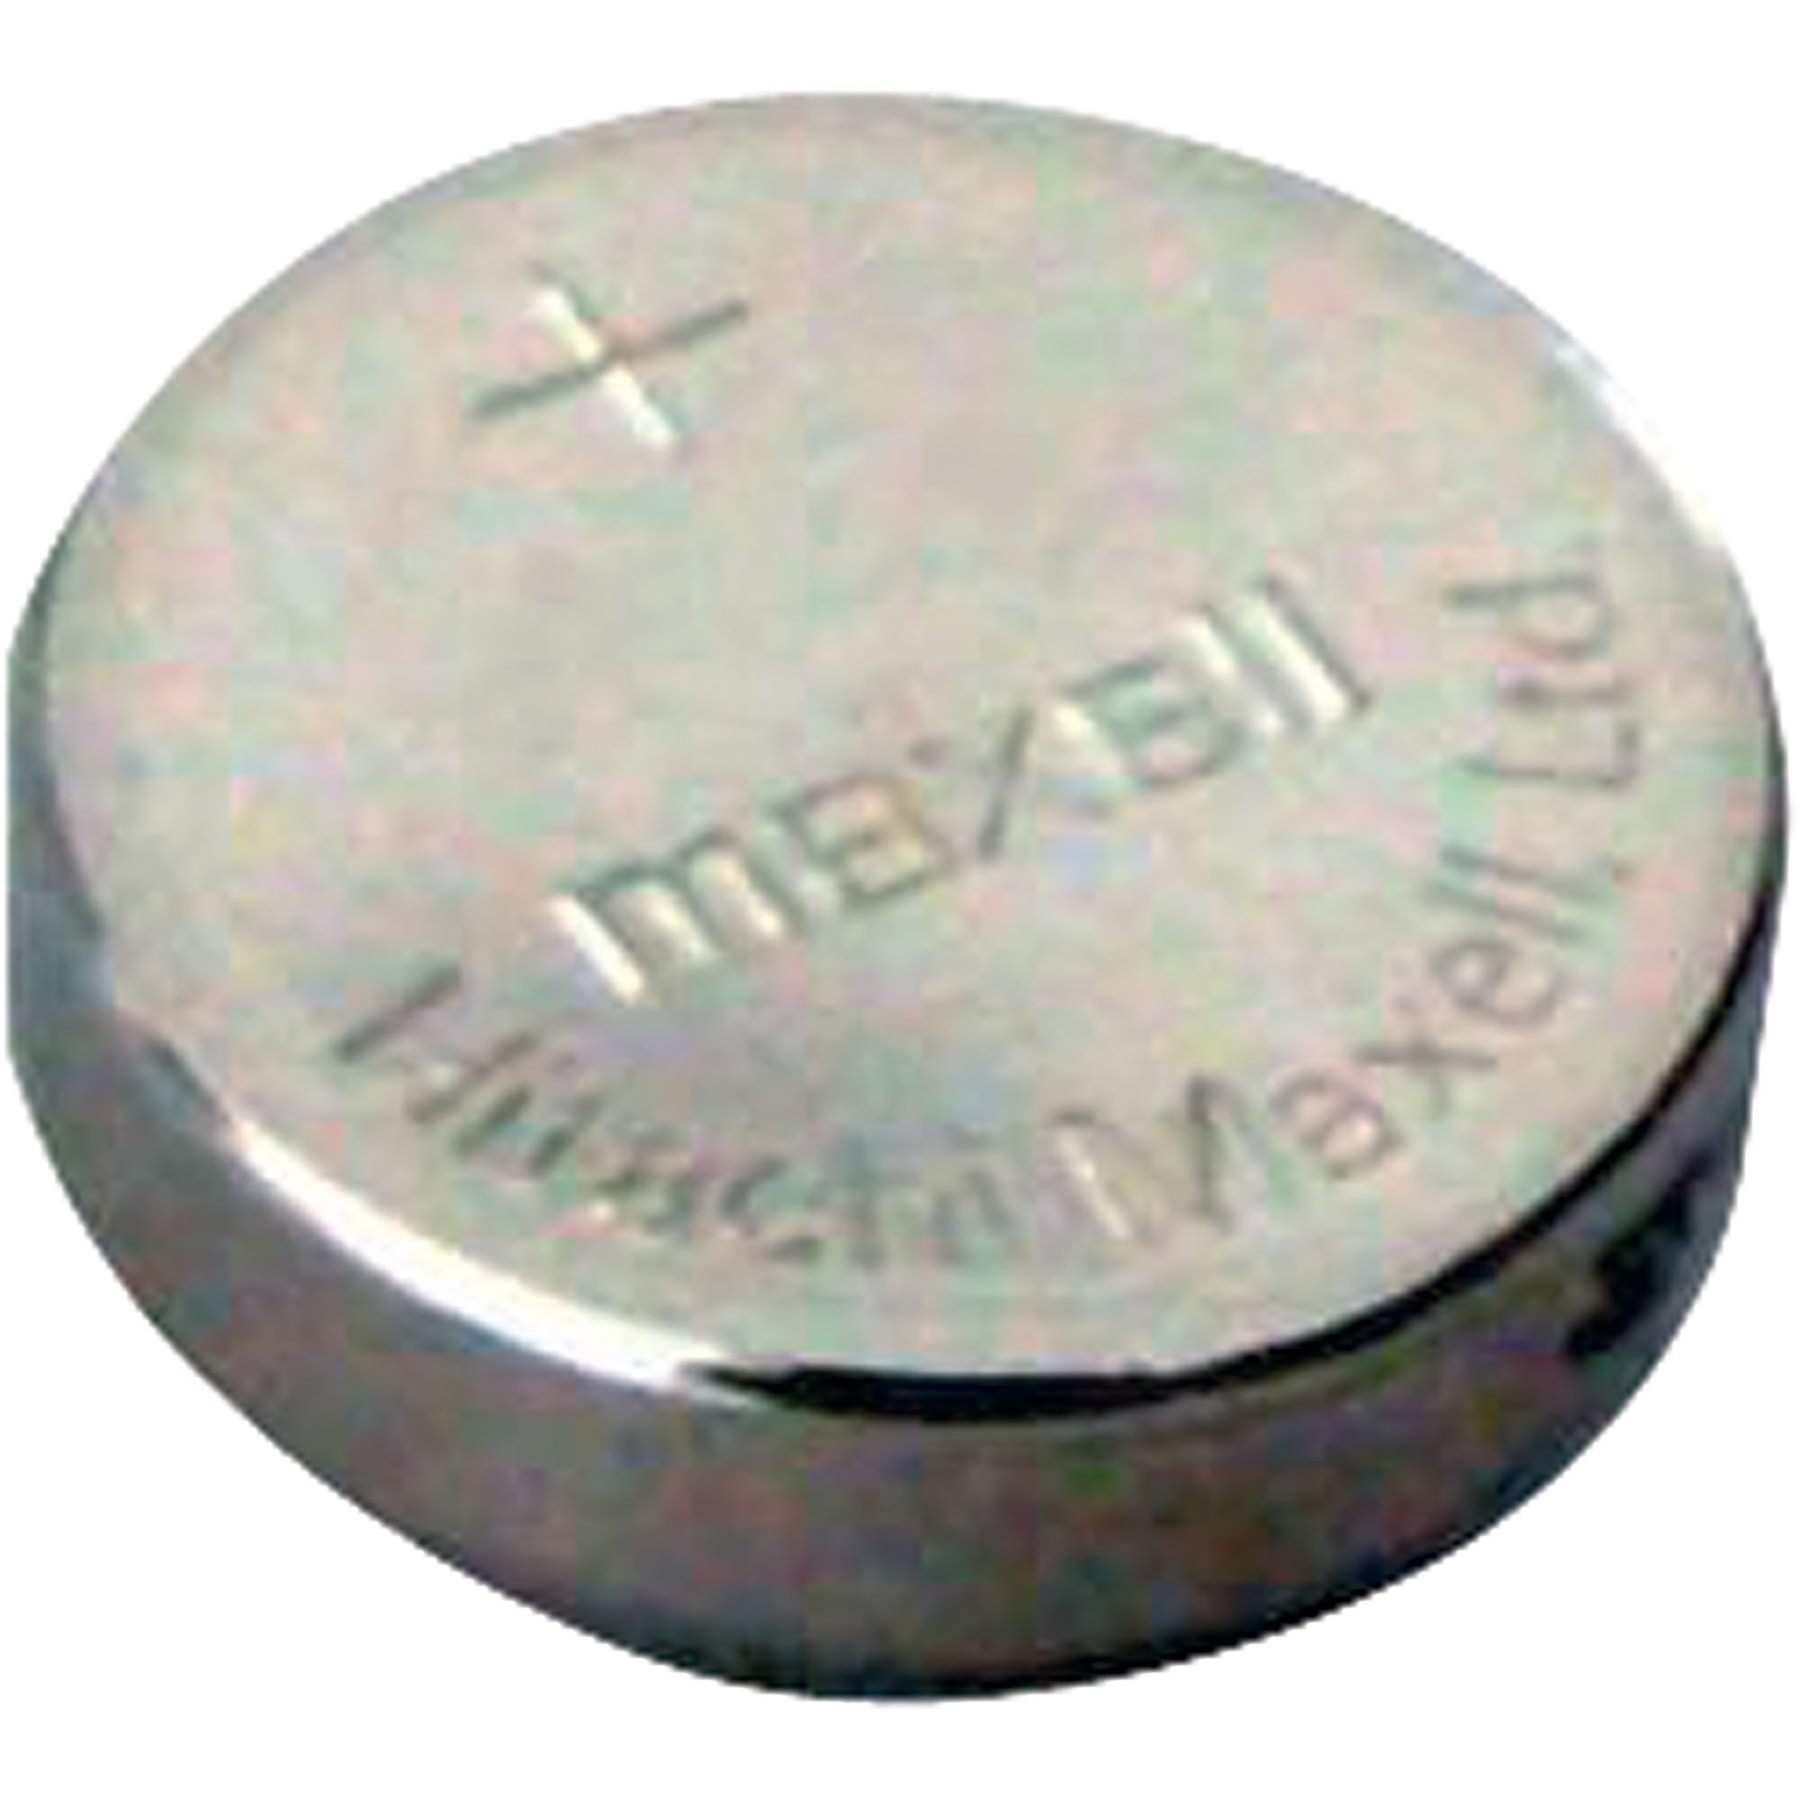 buy button cell